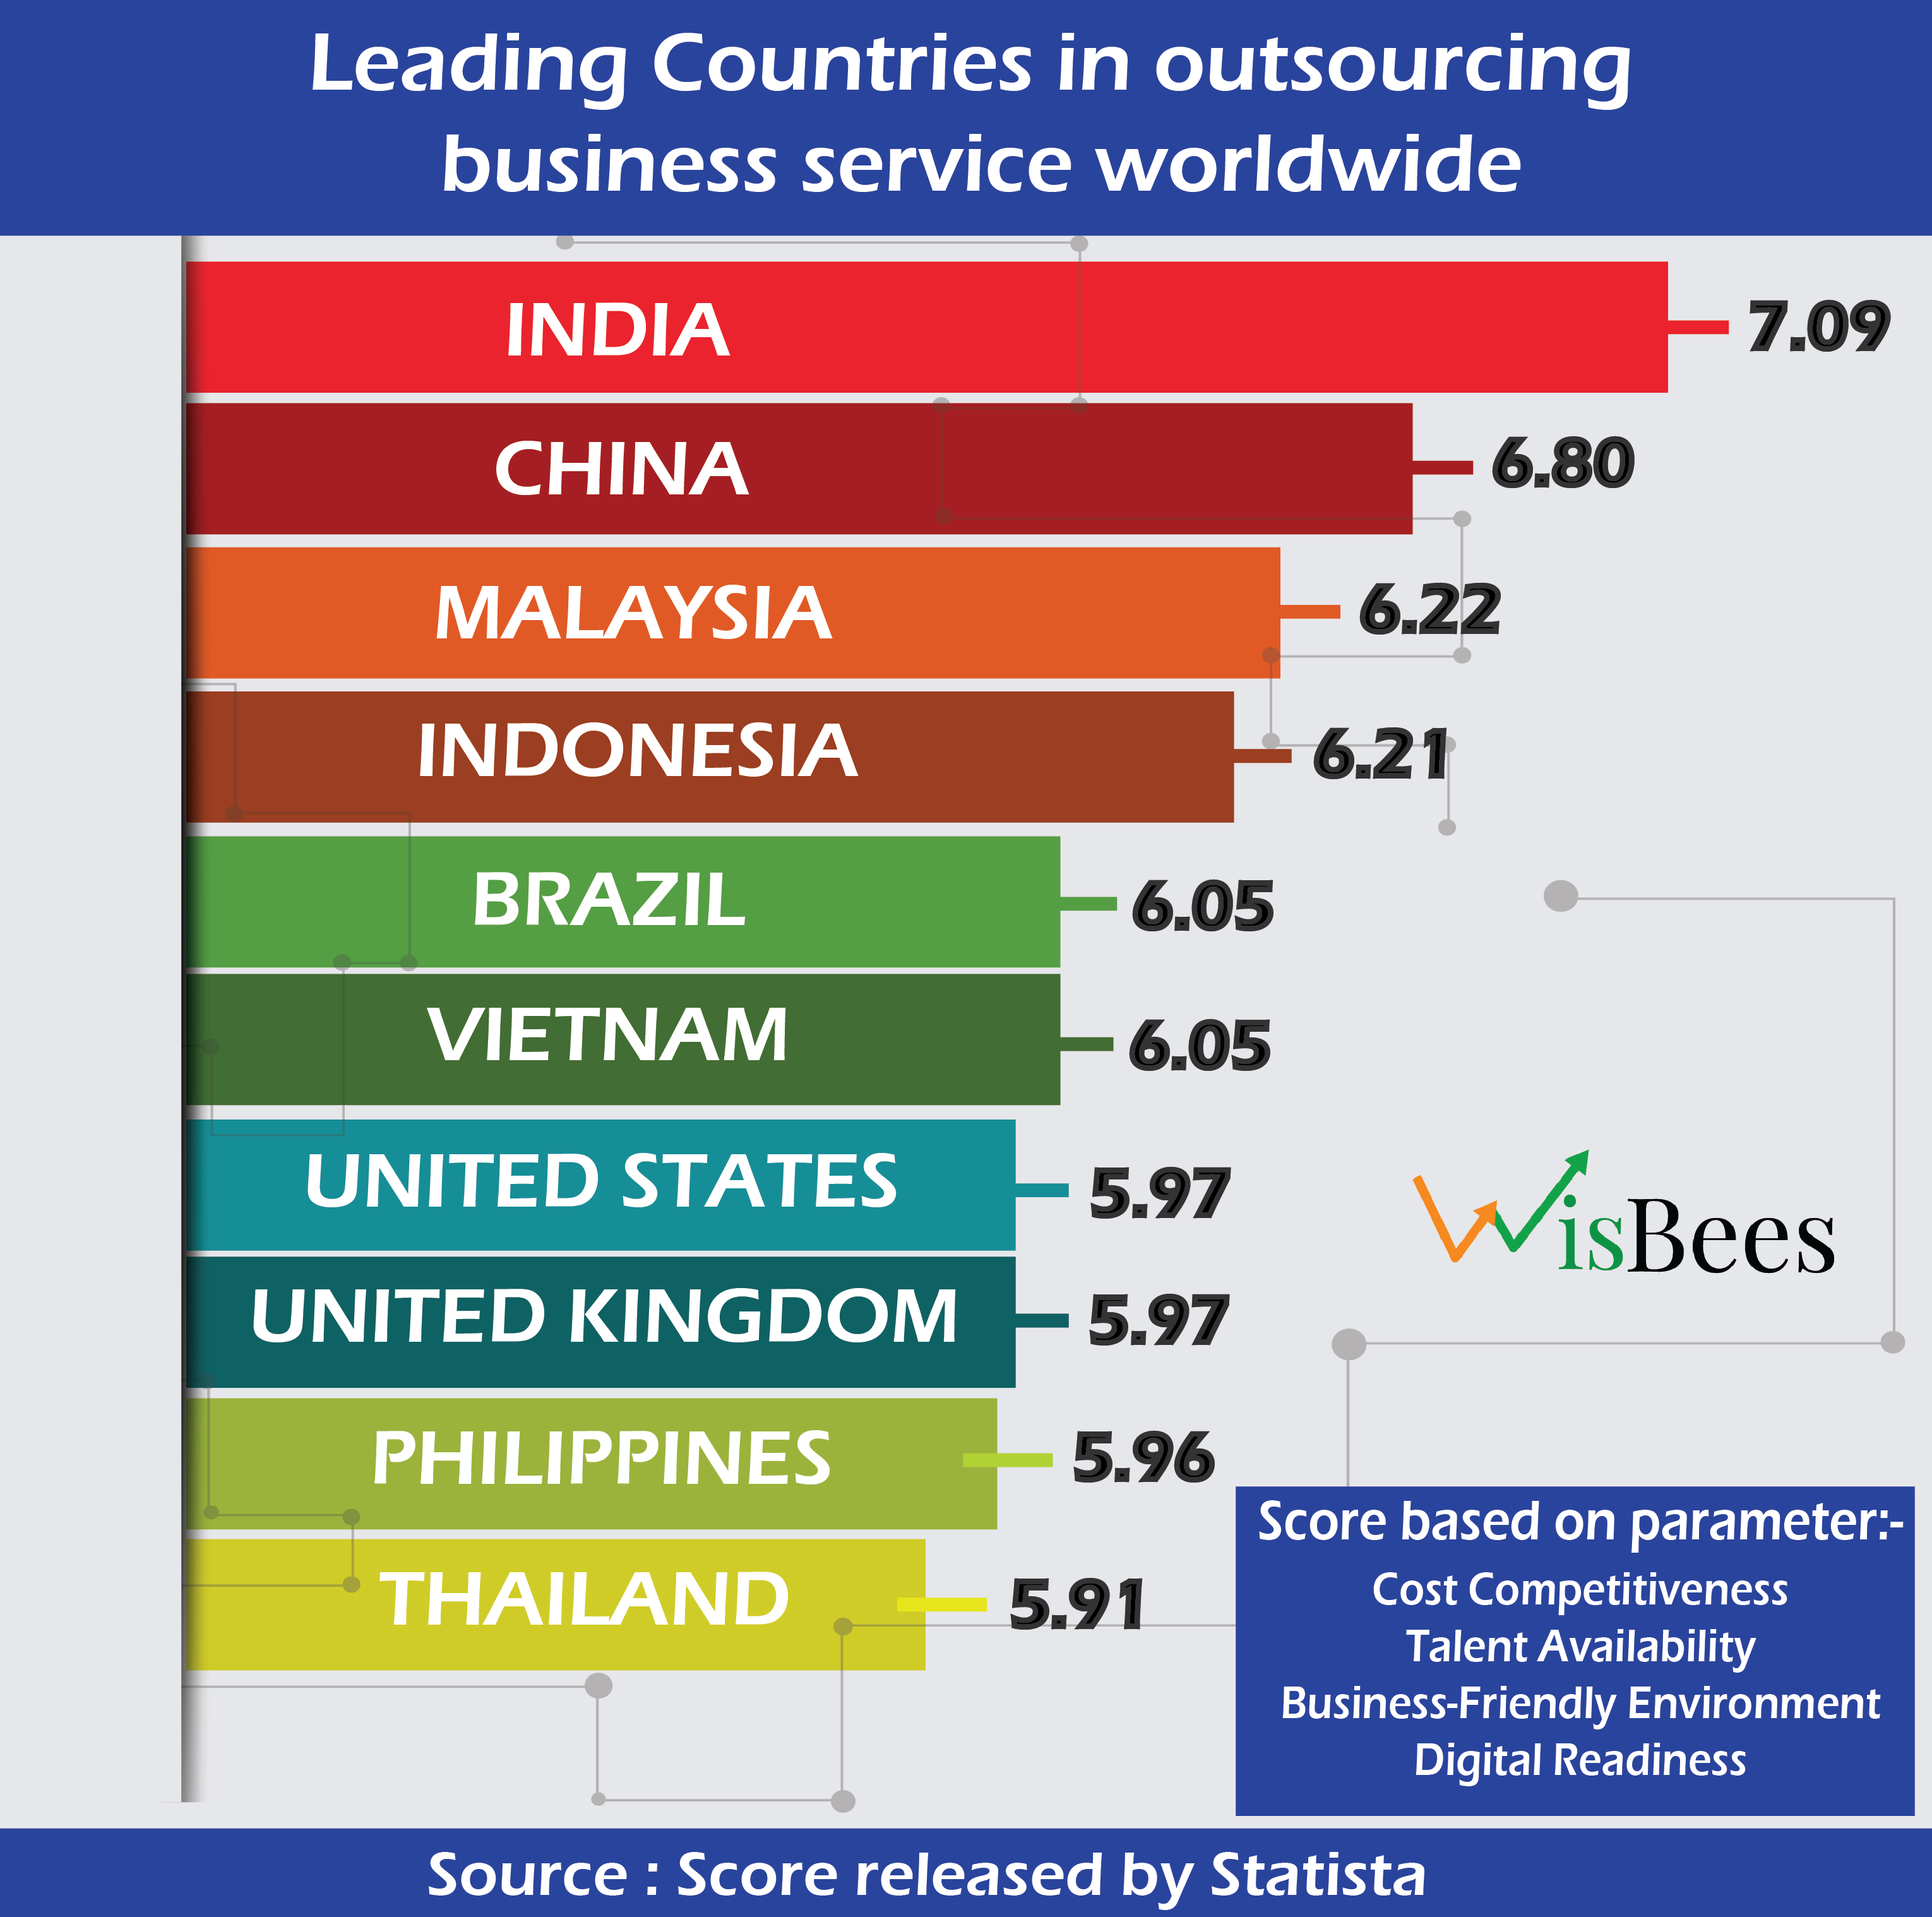 Did you know which country is at the forefront of business outsourcing?